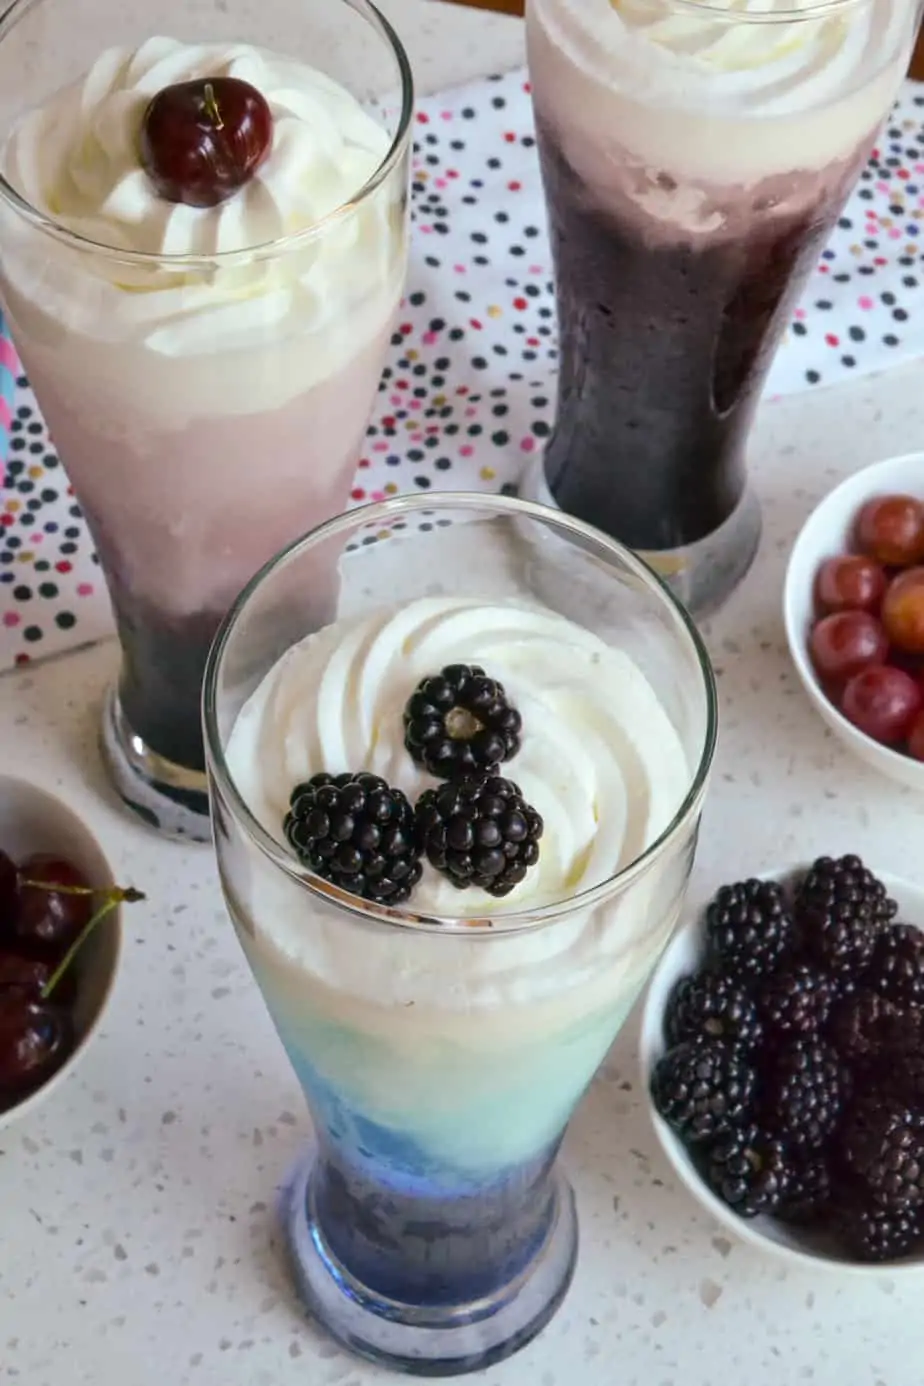 This is a delicious and fun Italian Cream Soda recipe with flavor combinations for everyone, all topped with fresh whipped cream and complementary garnishes.